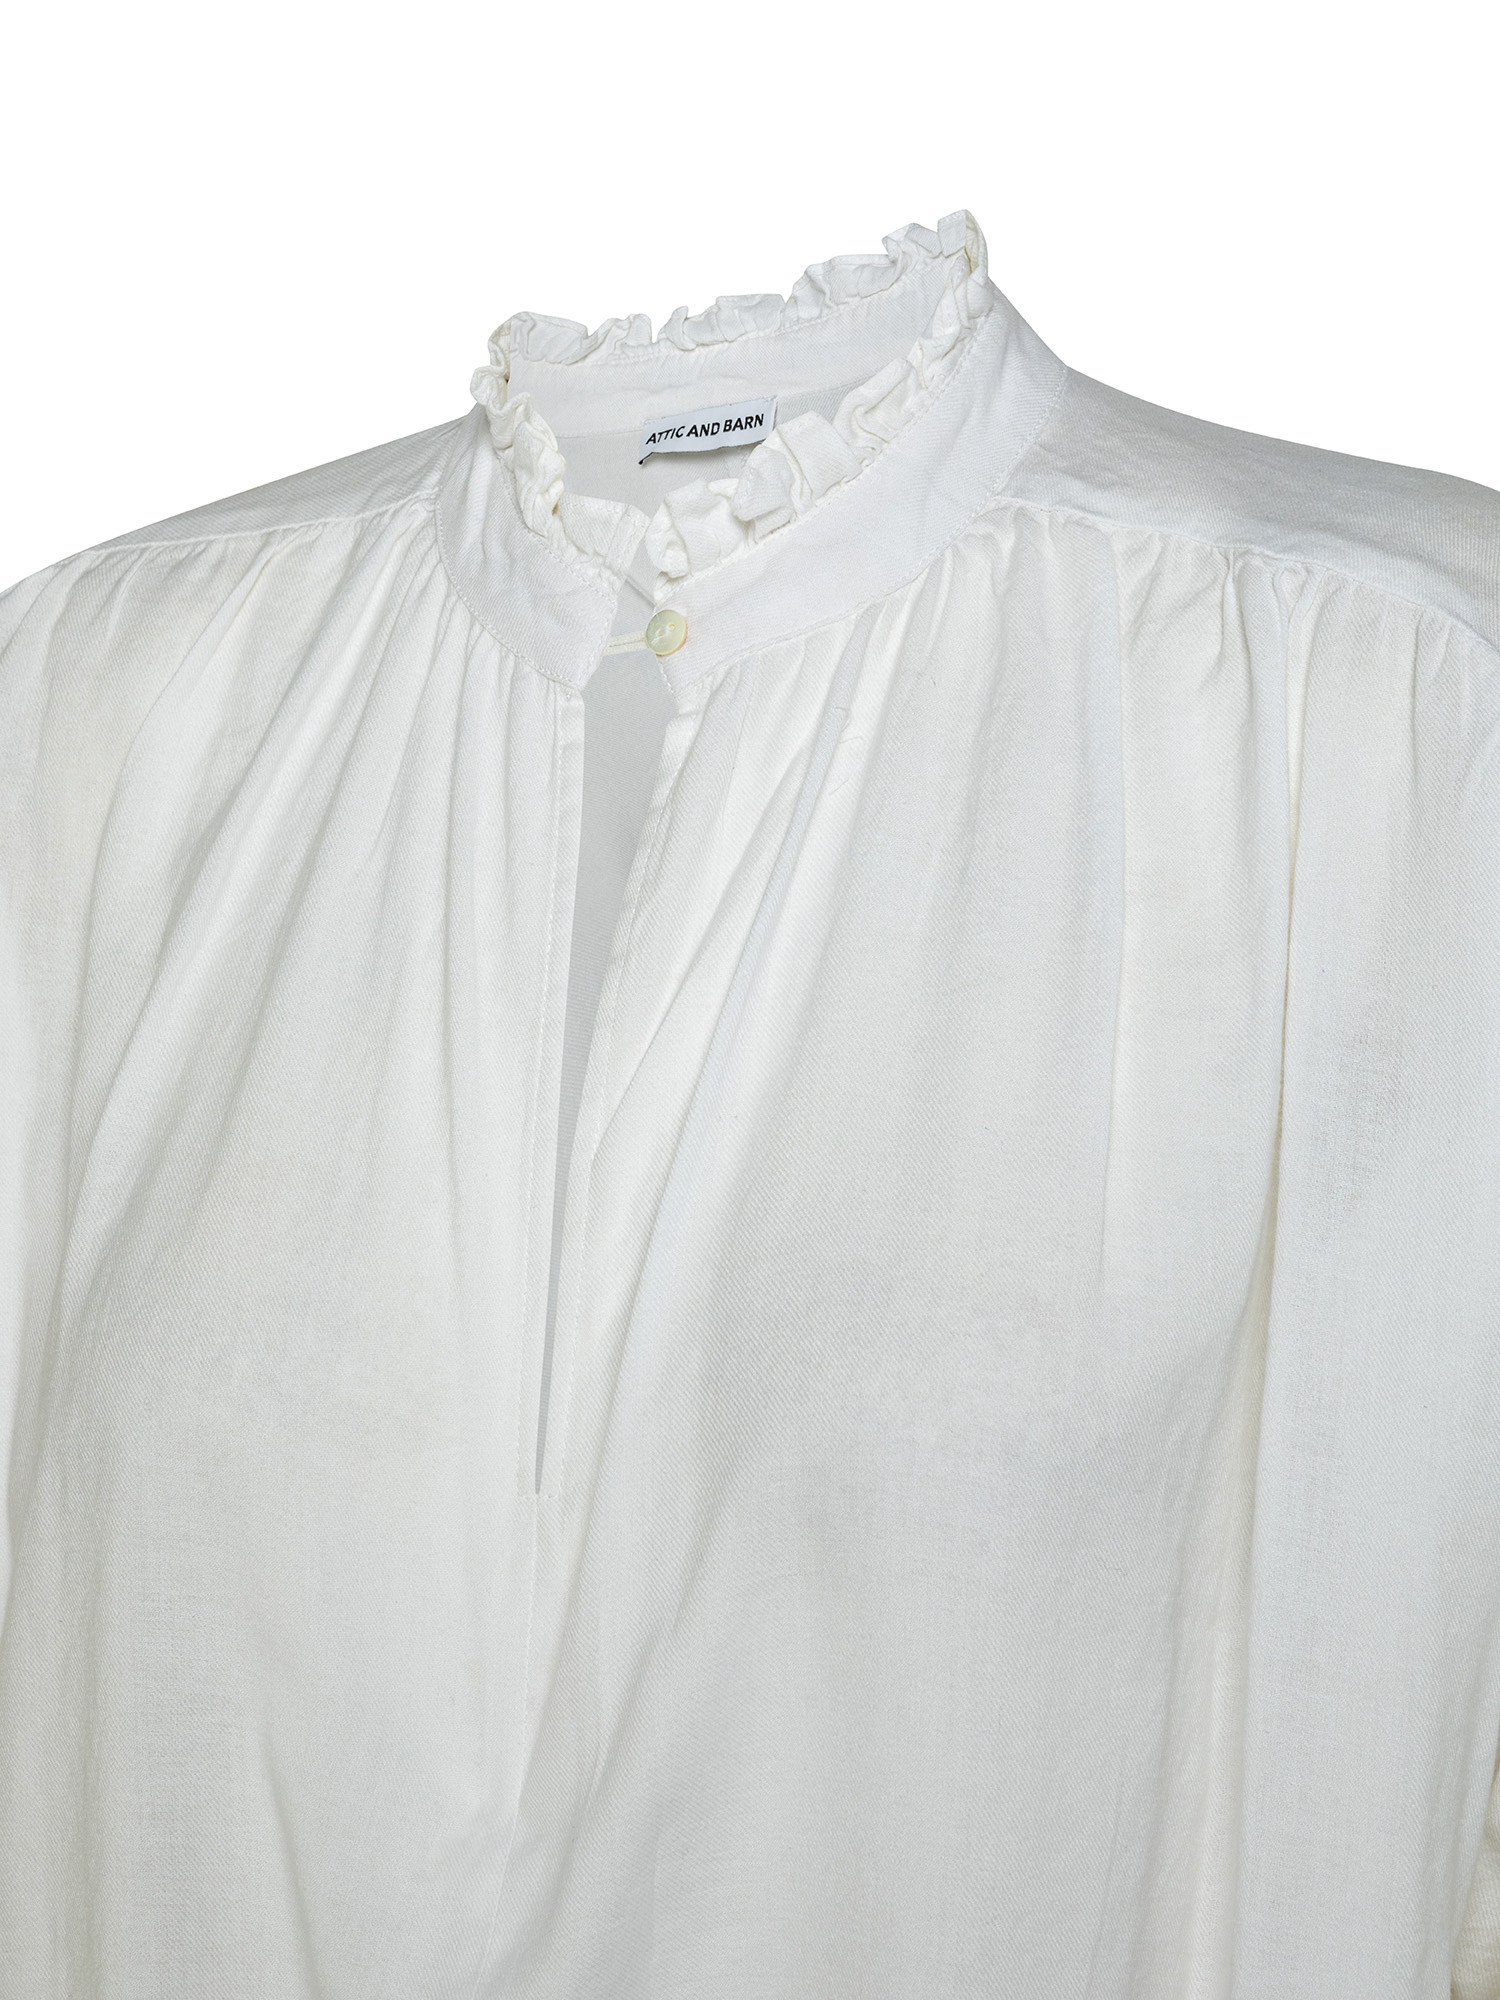 Blusa in cotone con maniche lunghe, Bianco, large image number 2